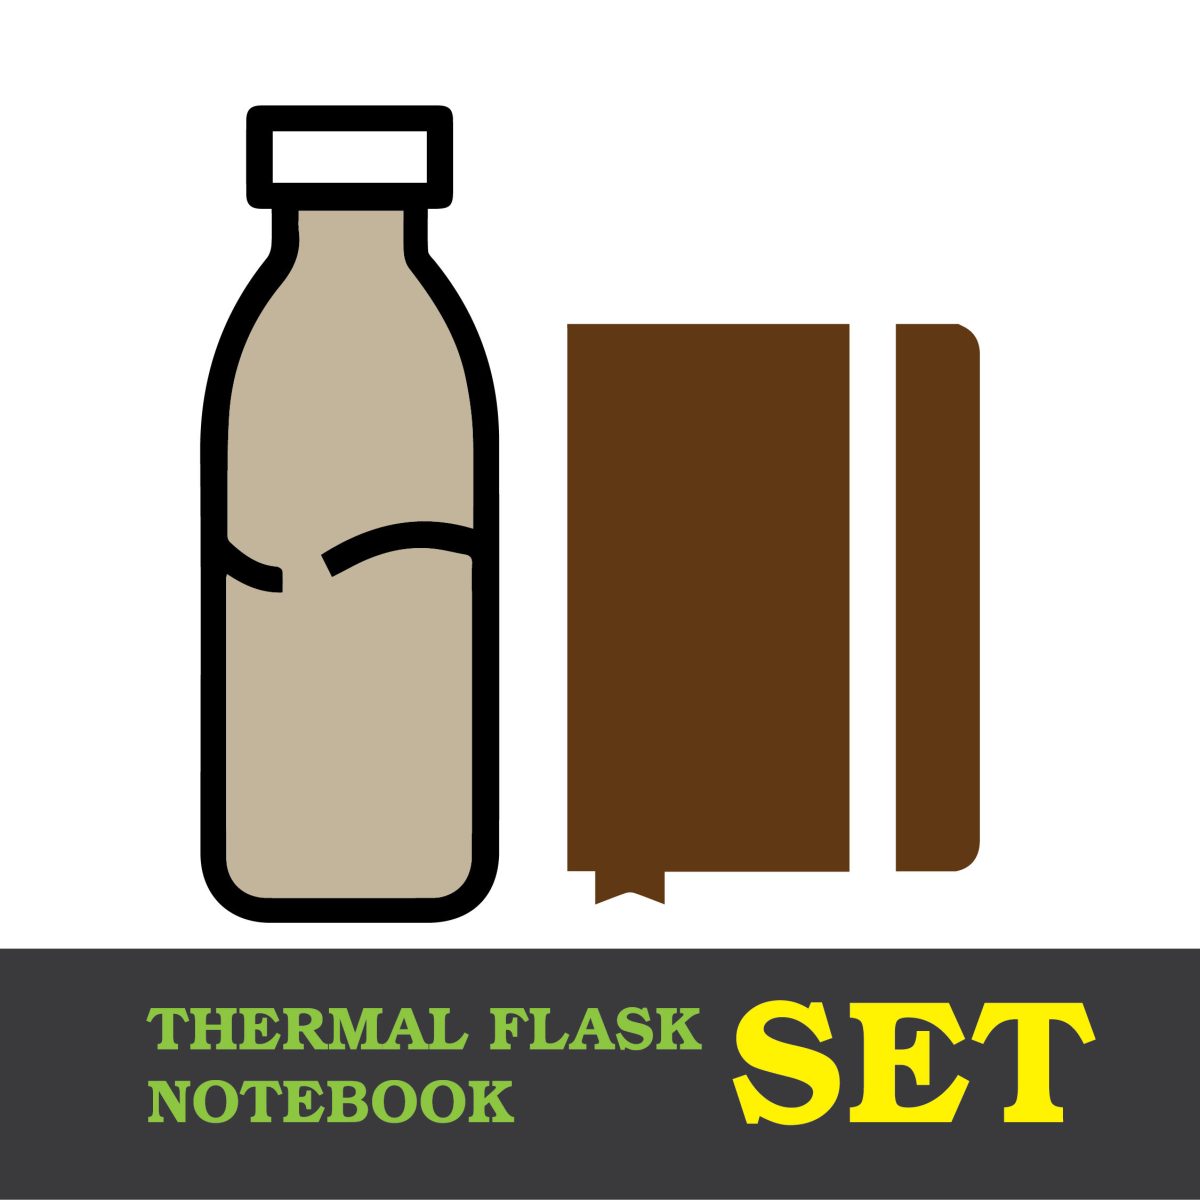 Thermal Flask-Notebook Gift Set